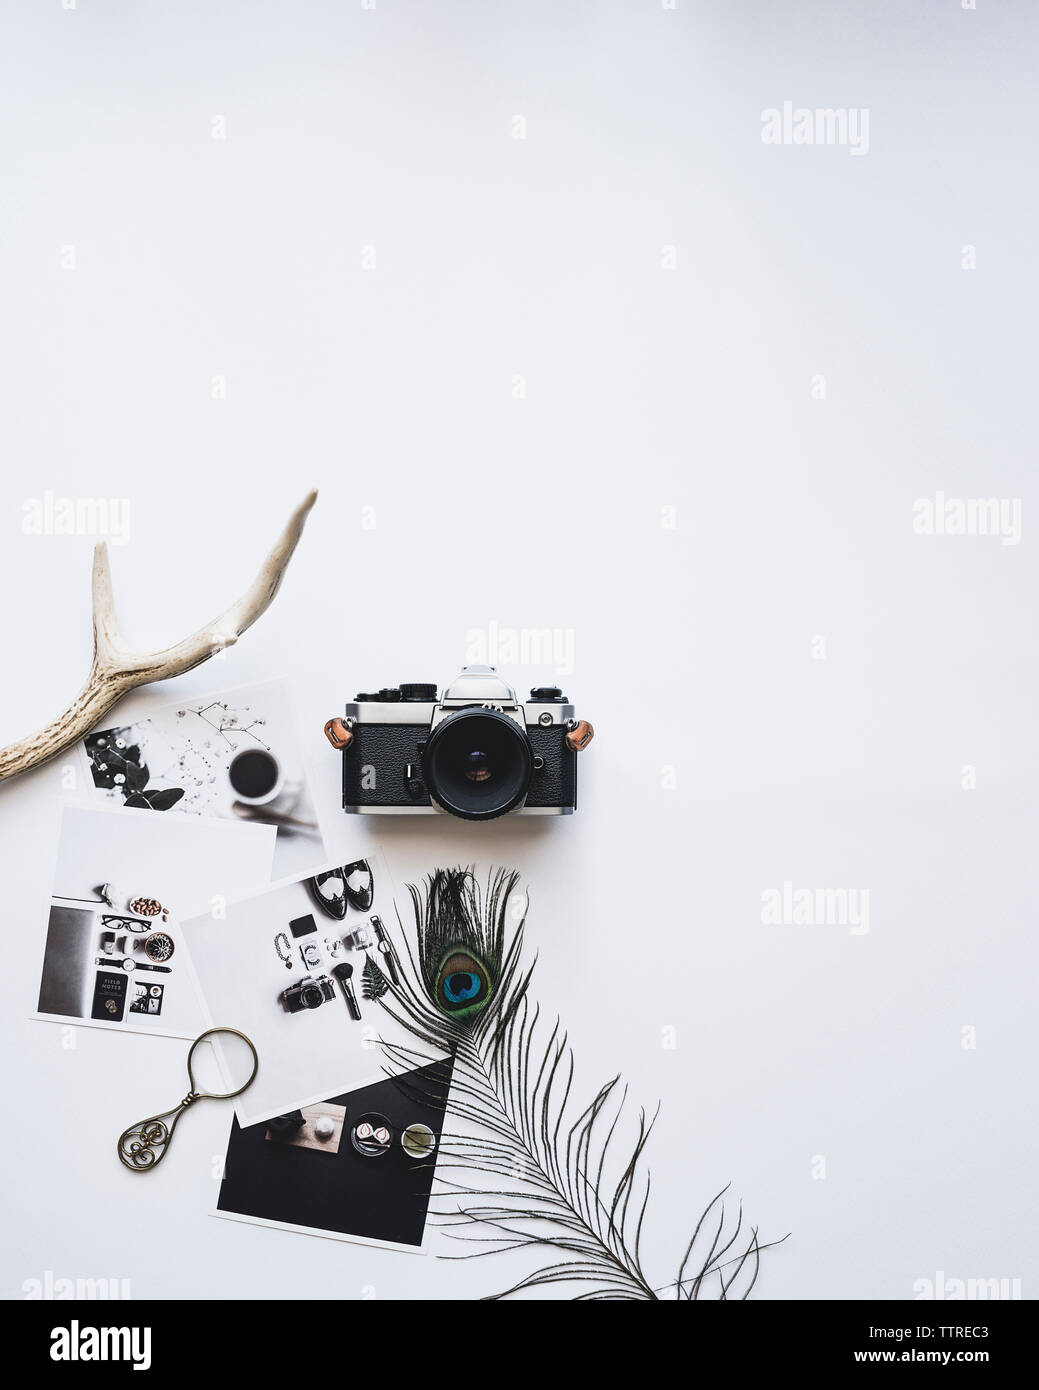 Overhead view of camera and photographs on white background Stock Photo